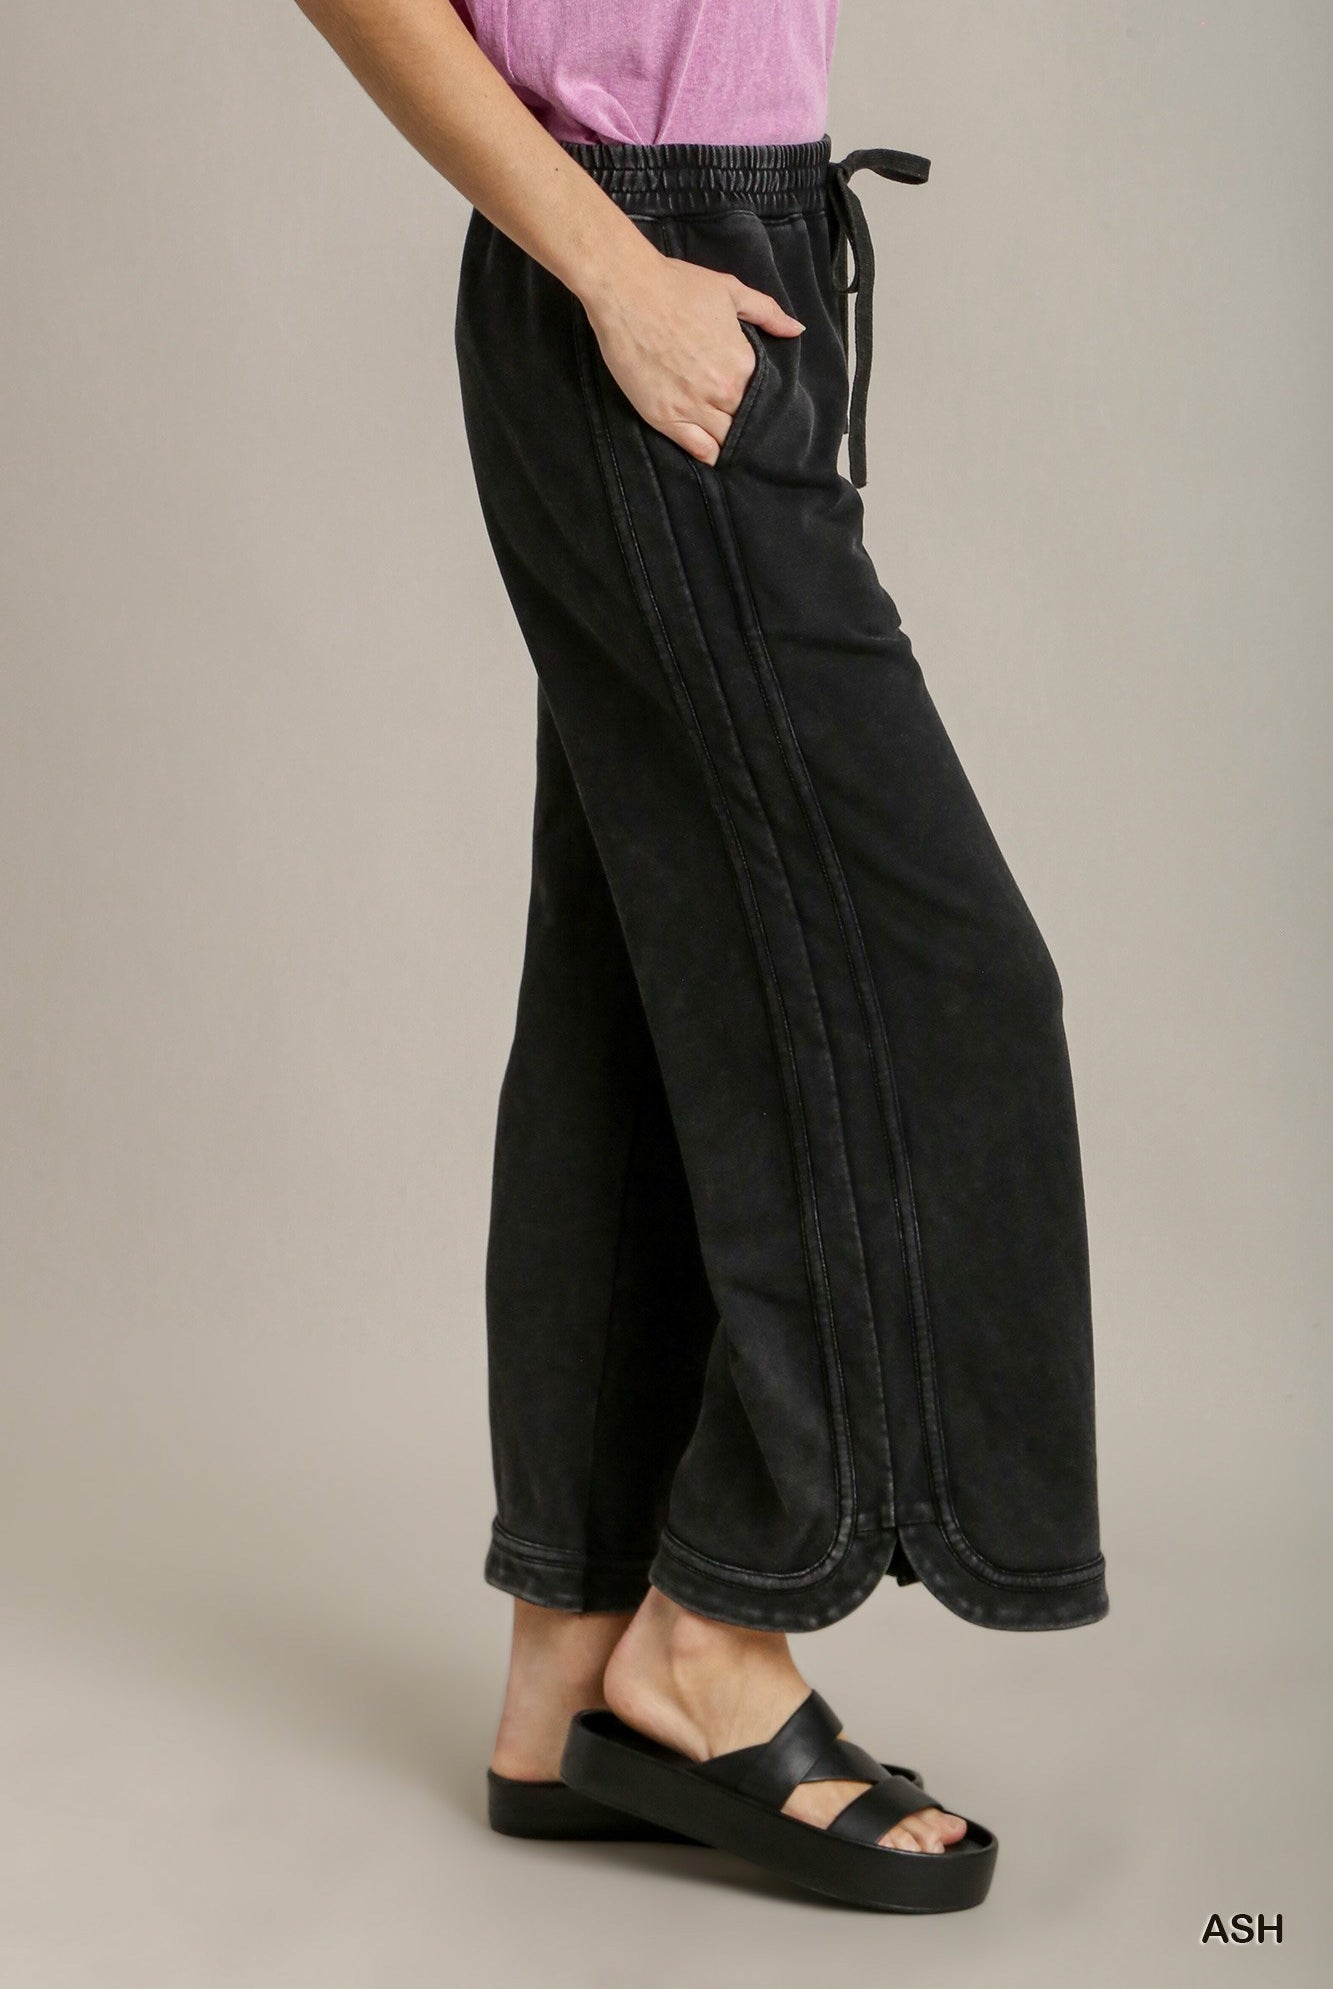 Ash Black Washed French Terry Elastic Waistband Wide Leg Pants | Stuffology Boutique-Pants-Umgee-Stuffology - Where Vintage Meets Modern, A Boutique for Real Women in Crosbyton, TX